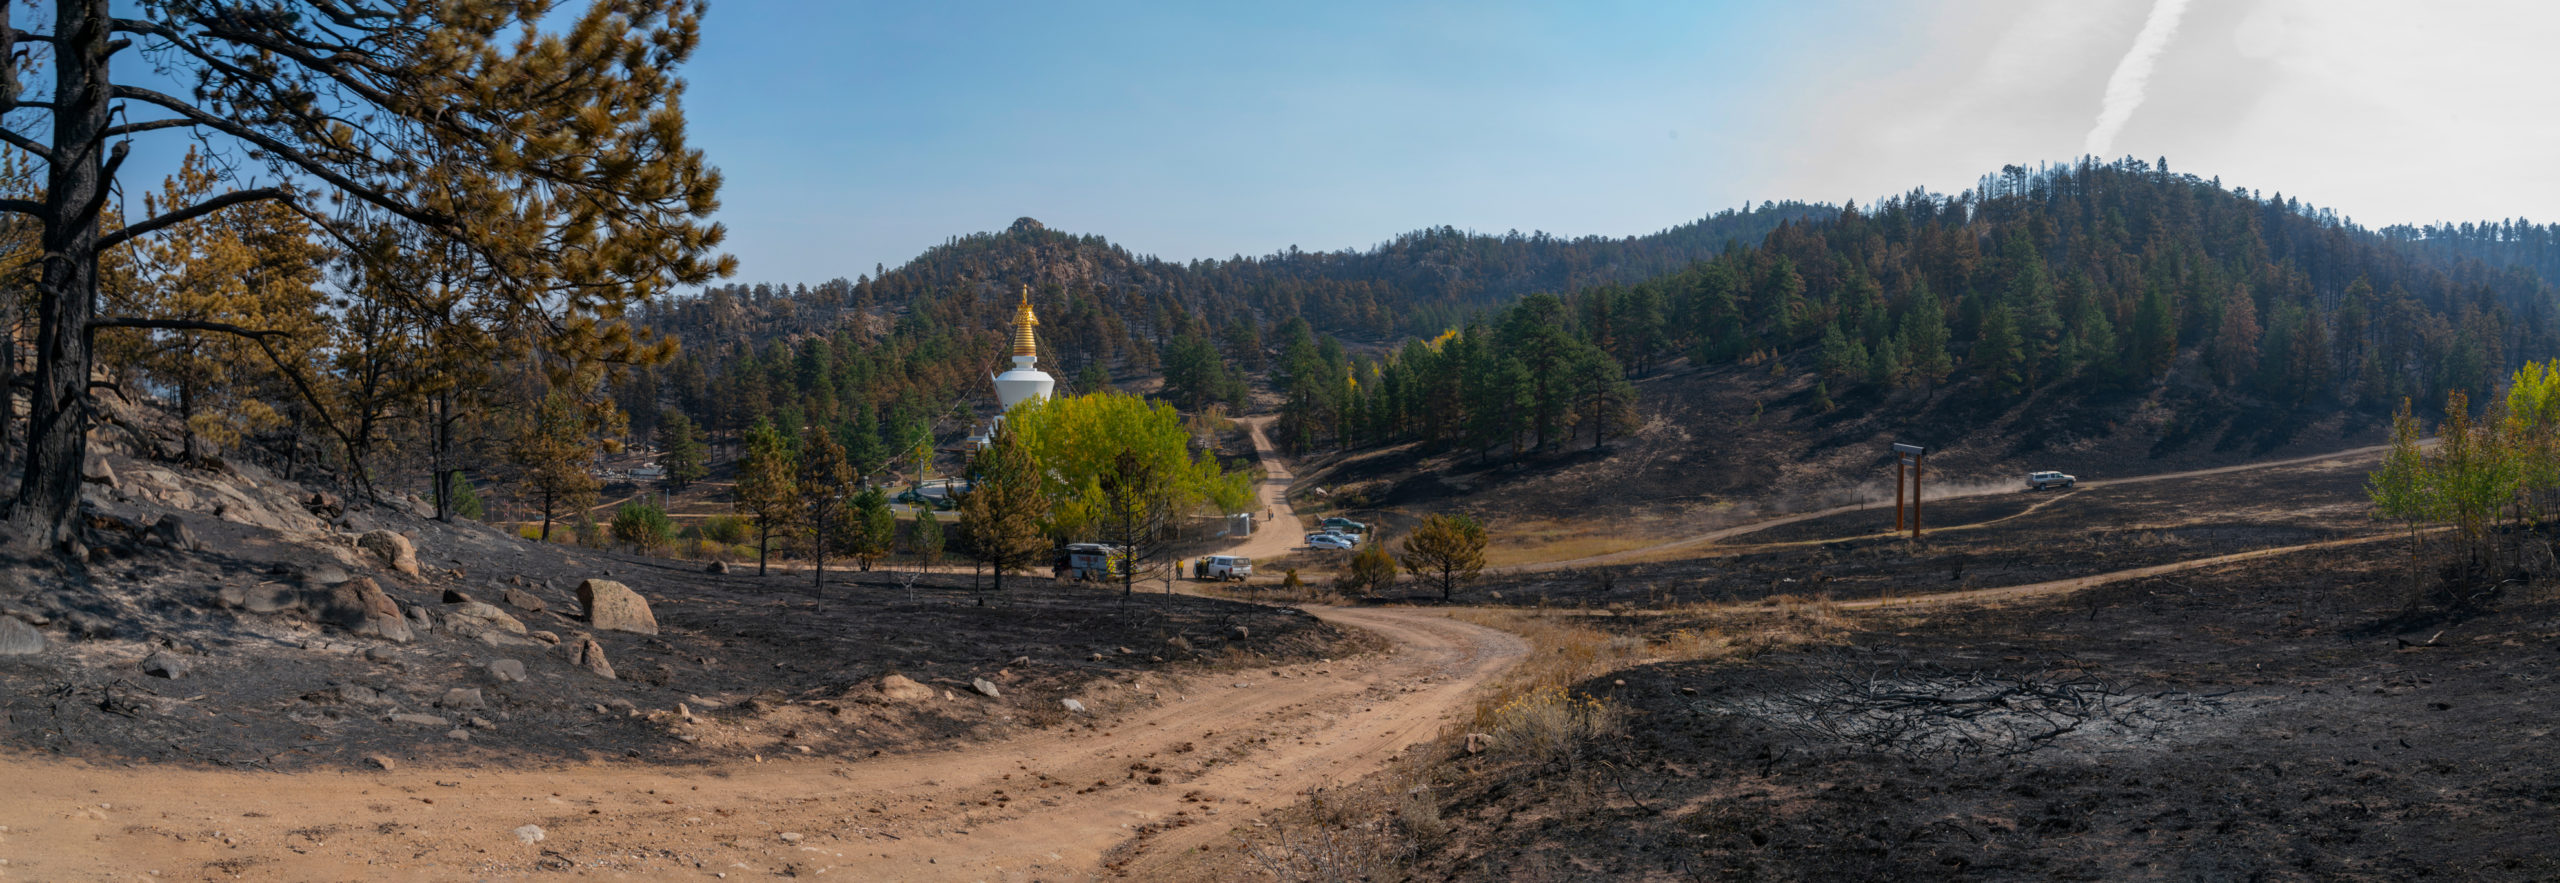 6. Looking east towards the Stupa and Marpa Point